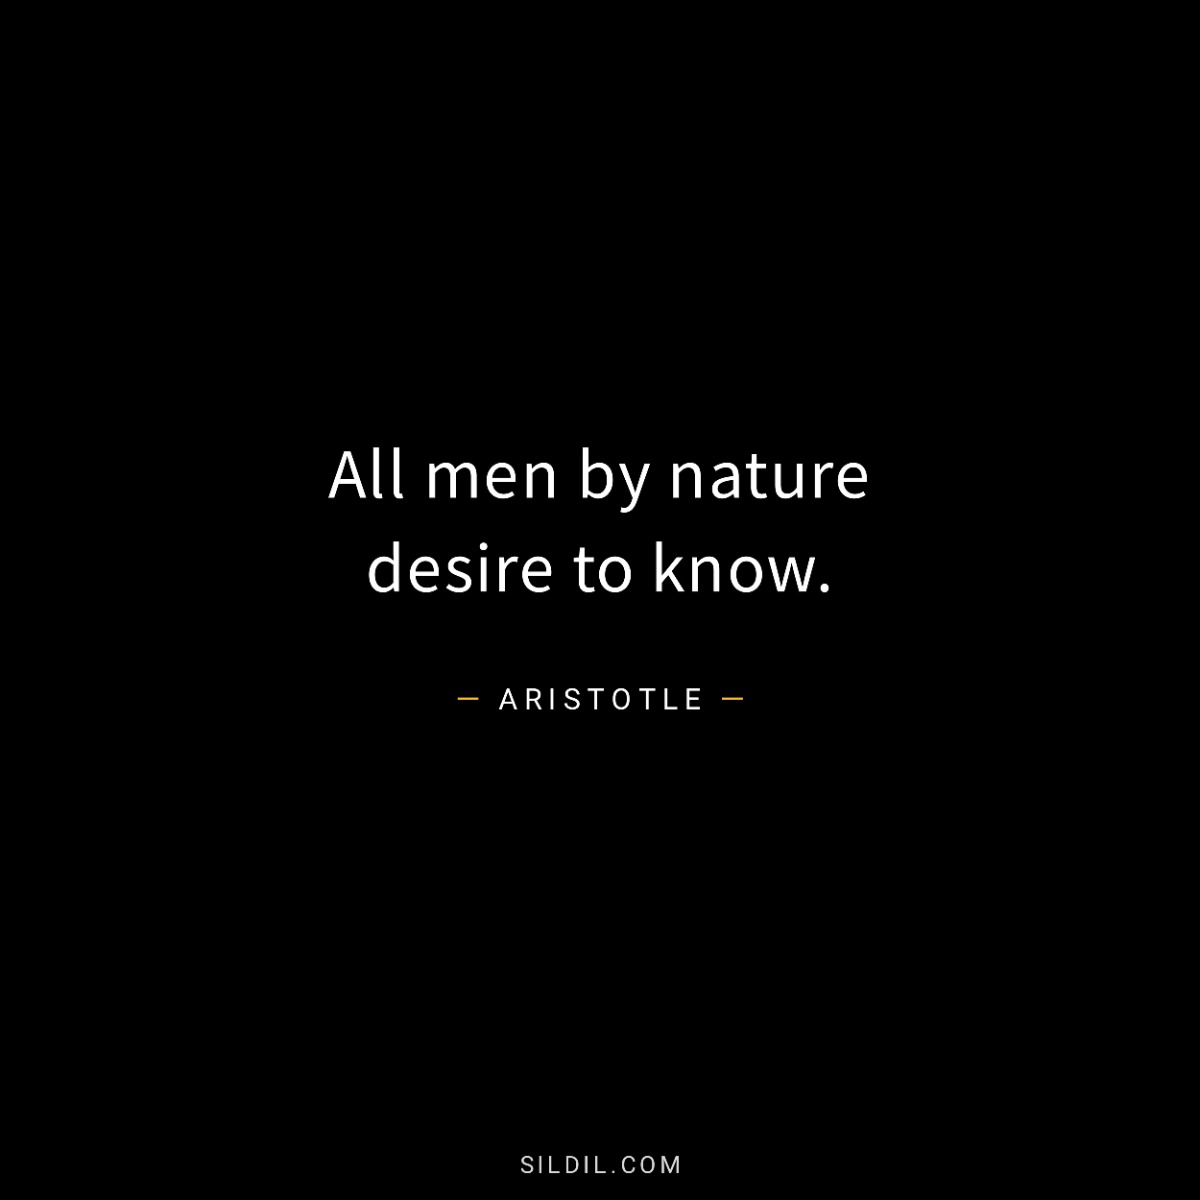 All men by nature desire to know.